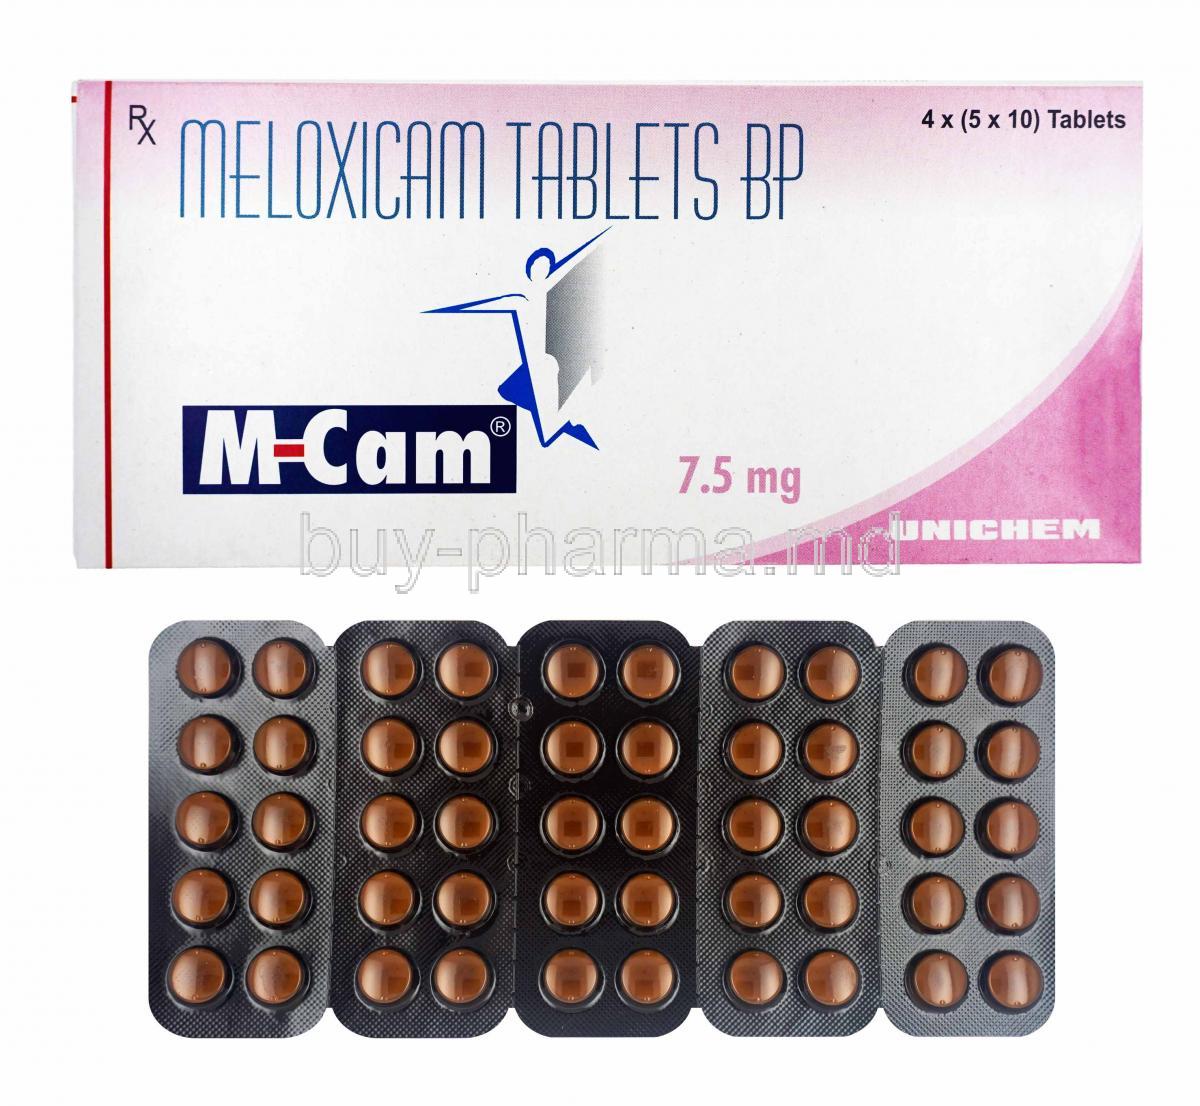 M-Cam, Meloxicam 7.5mg box and tablets